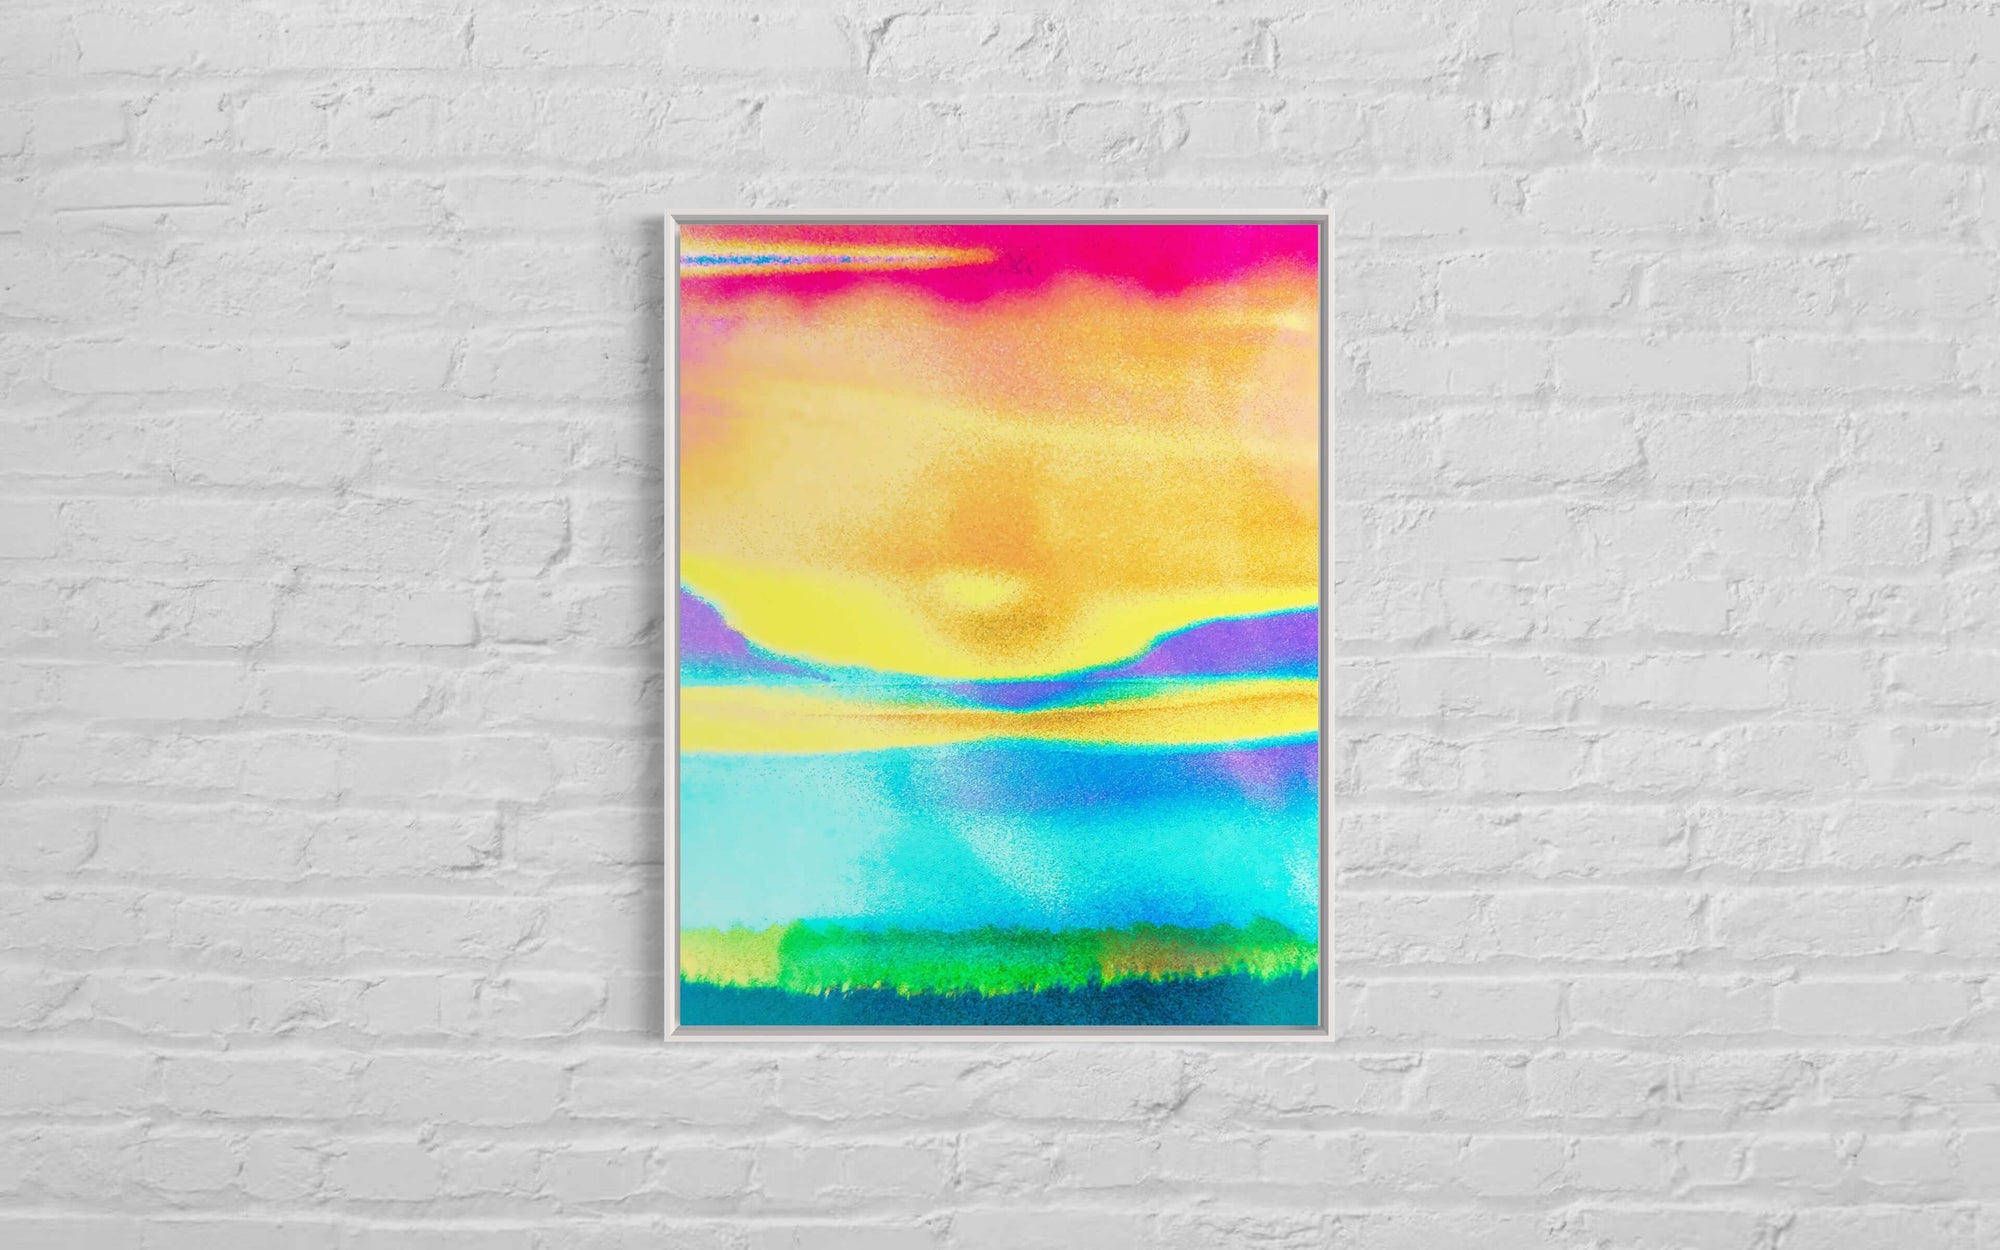 The image features "Raising Energy I," an artwork against a white brick wall. This piece is rich in fluorescent colours: yellows and oranges in the centre blend into blues and greens at the bottom, with a stripe of pink at the top. It gives the impression of a radiant, colourful sunrise that's full of life and energy. Its vivid colours stand sharply against the wall’s stark background.